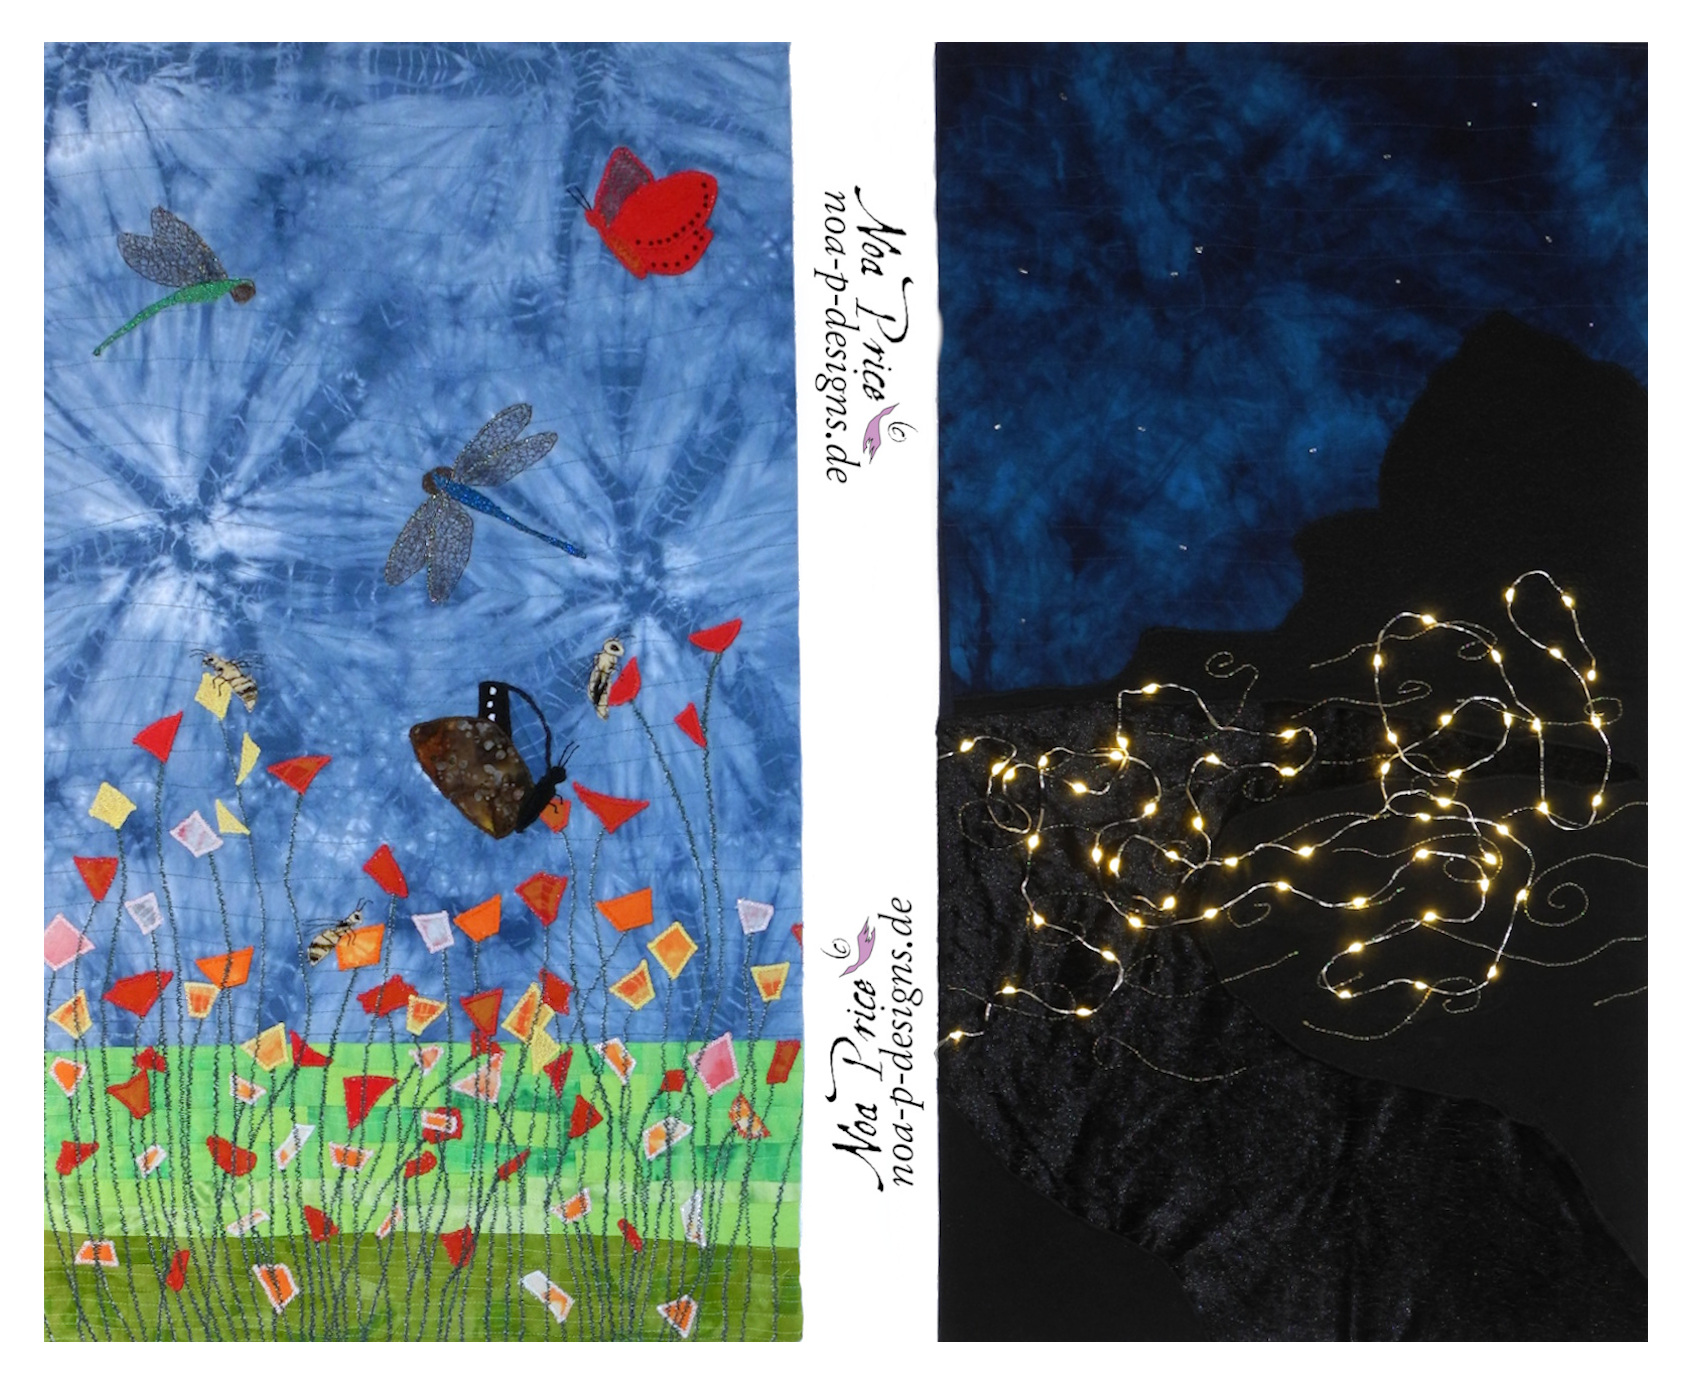 Two images one with LED lamps as fire flies and one with shiboried flowers and insects